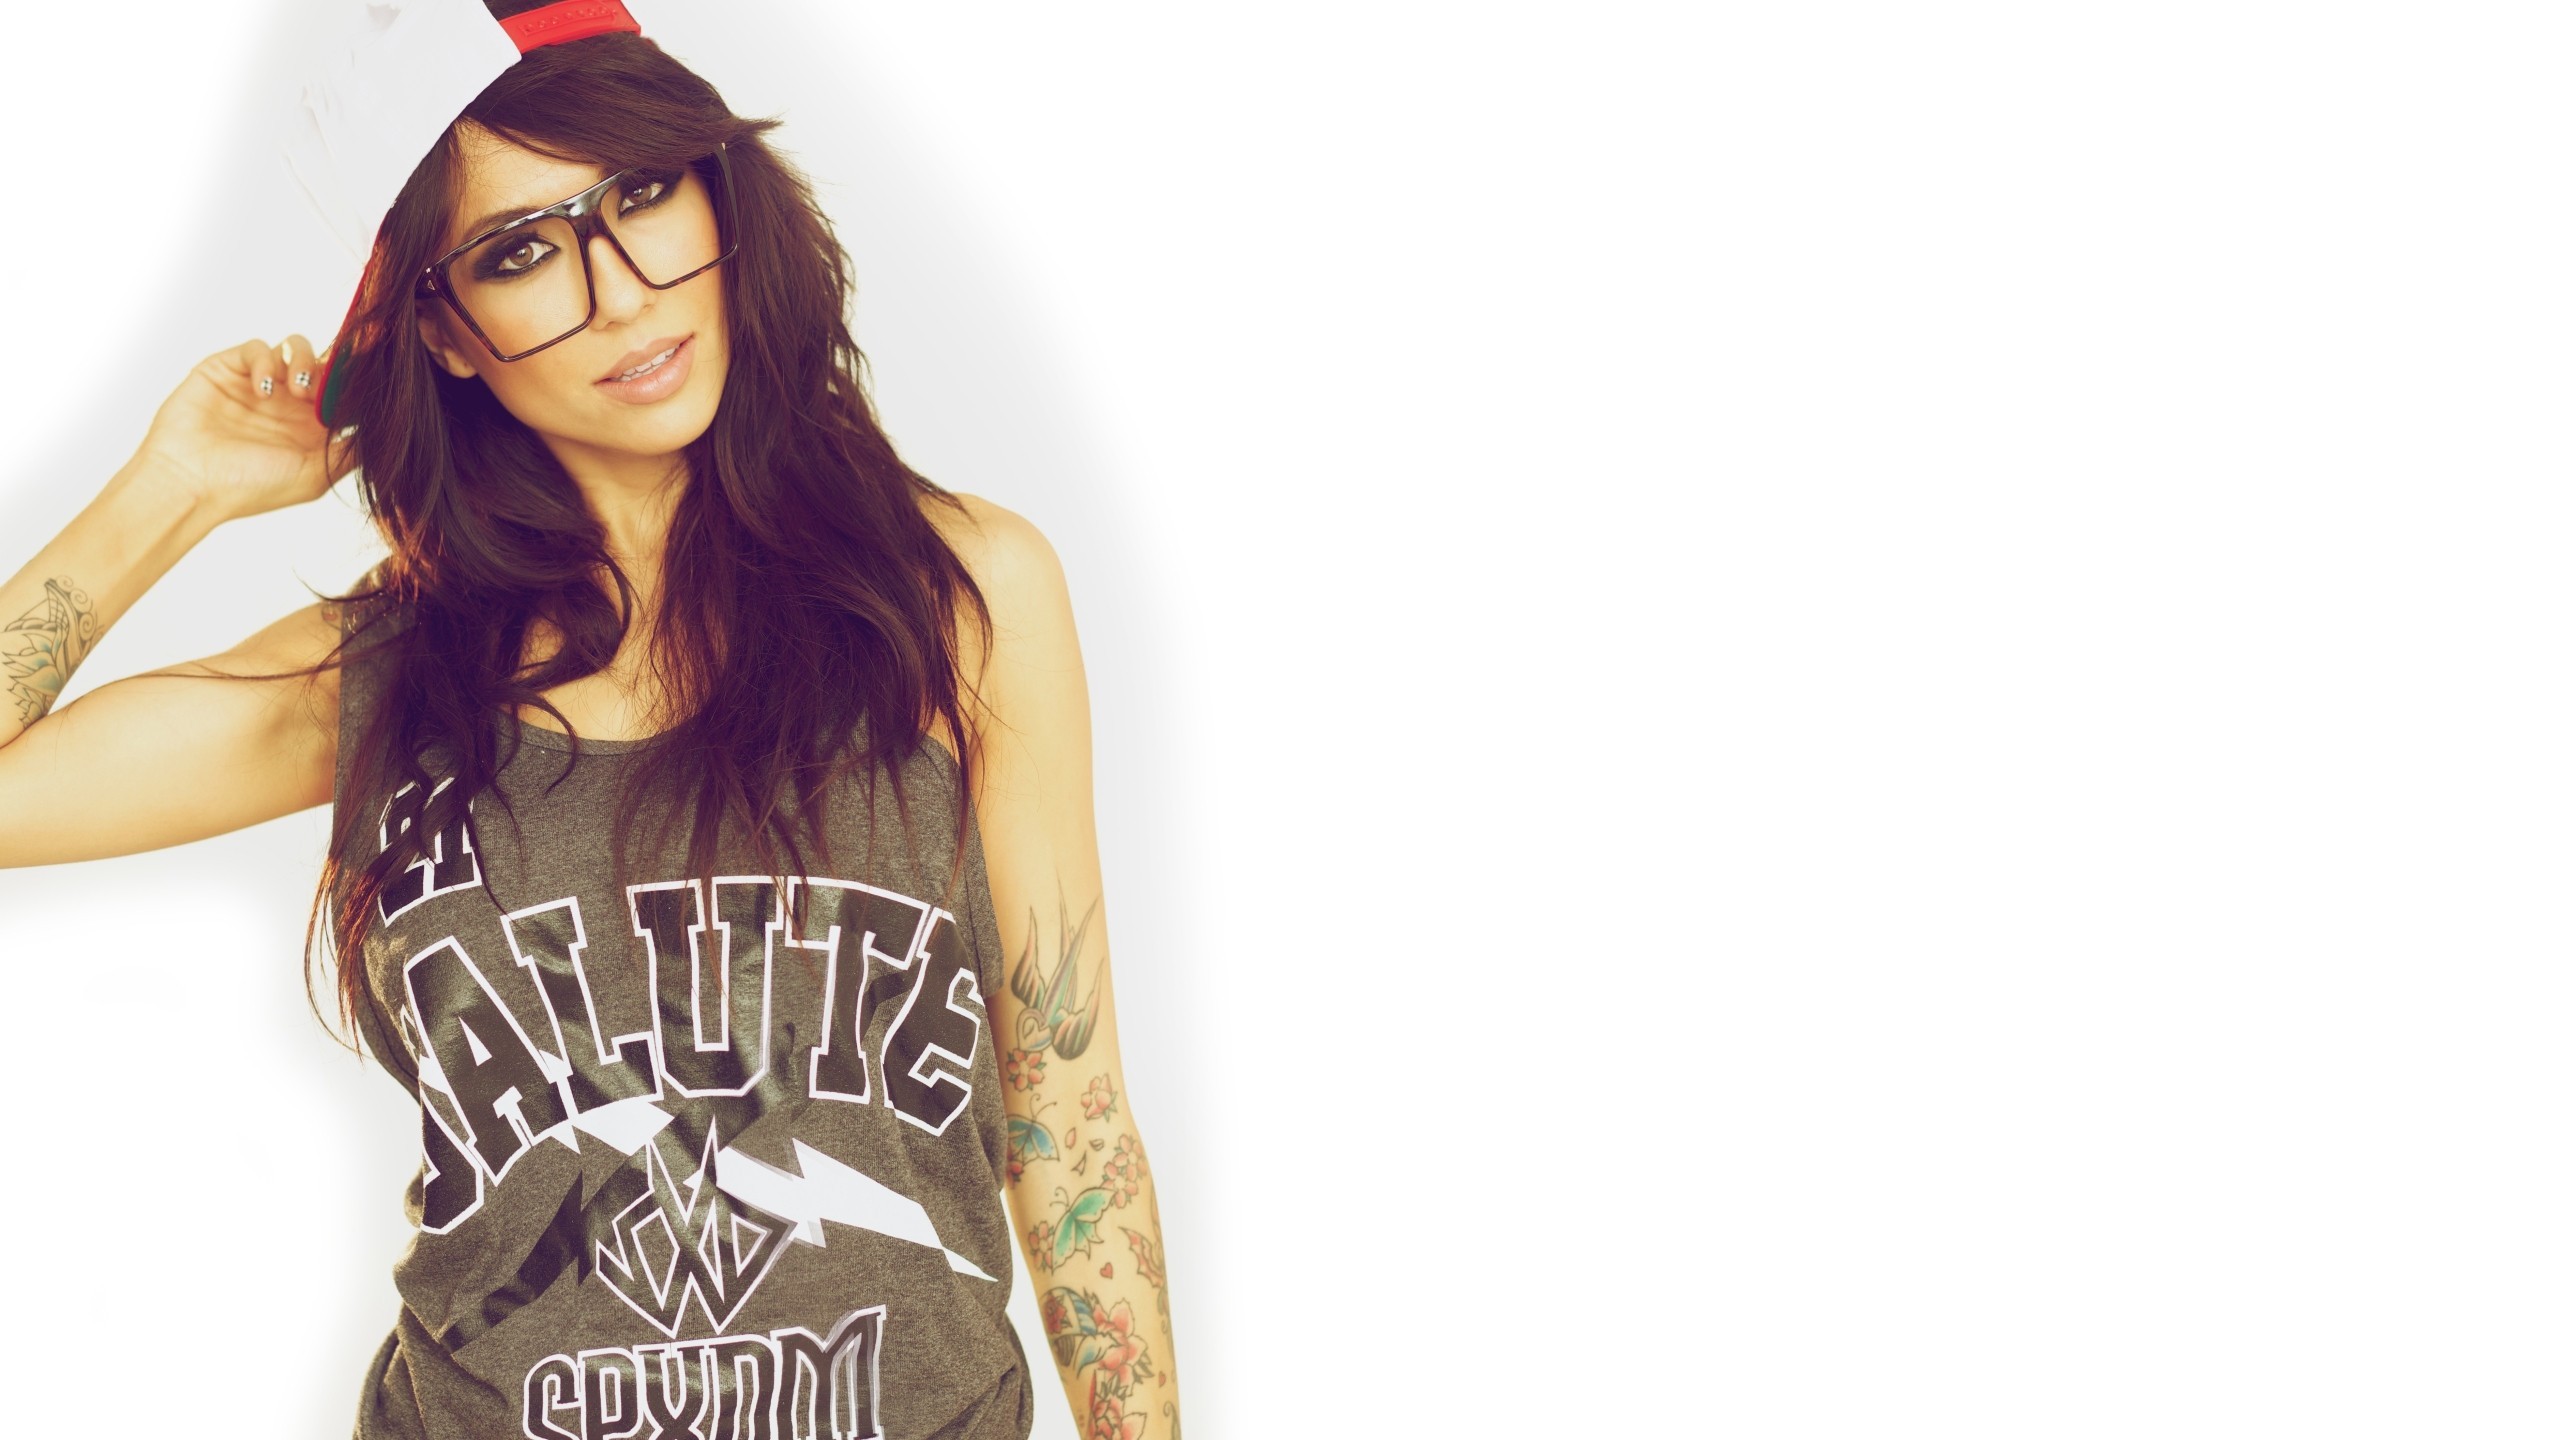 People 2560x1440 Alexandra Carrie Layus American women model women women with glasses long hair brunette tattoo inked girls printed shirts shirt white background looking at viewer